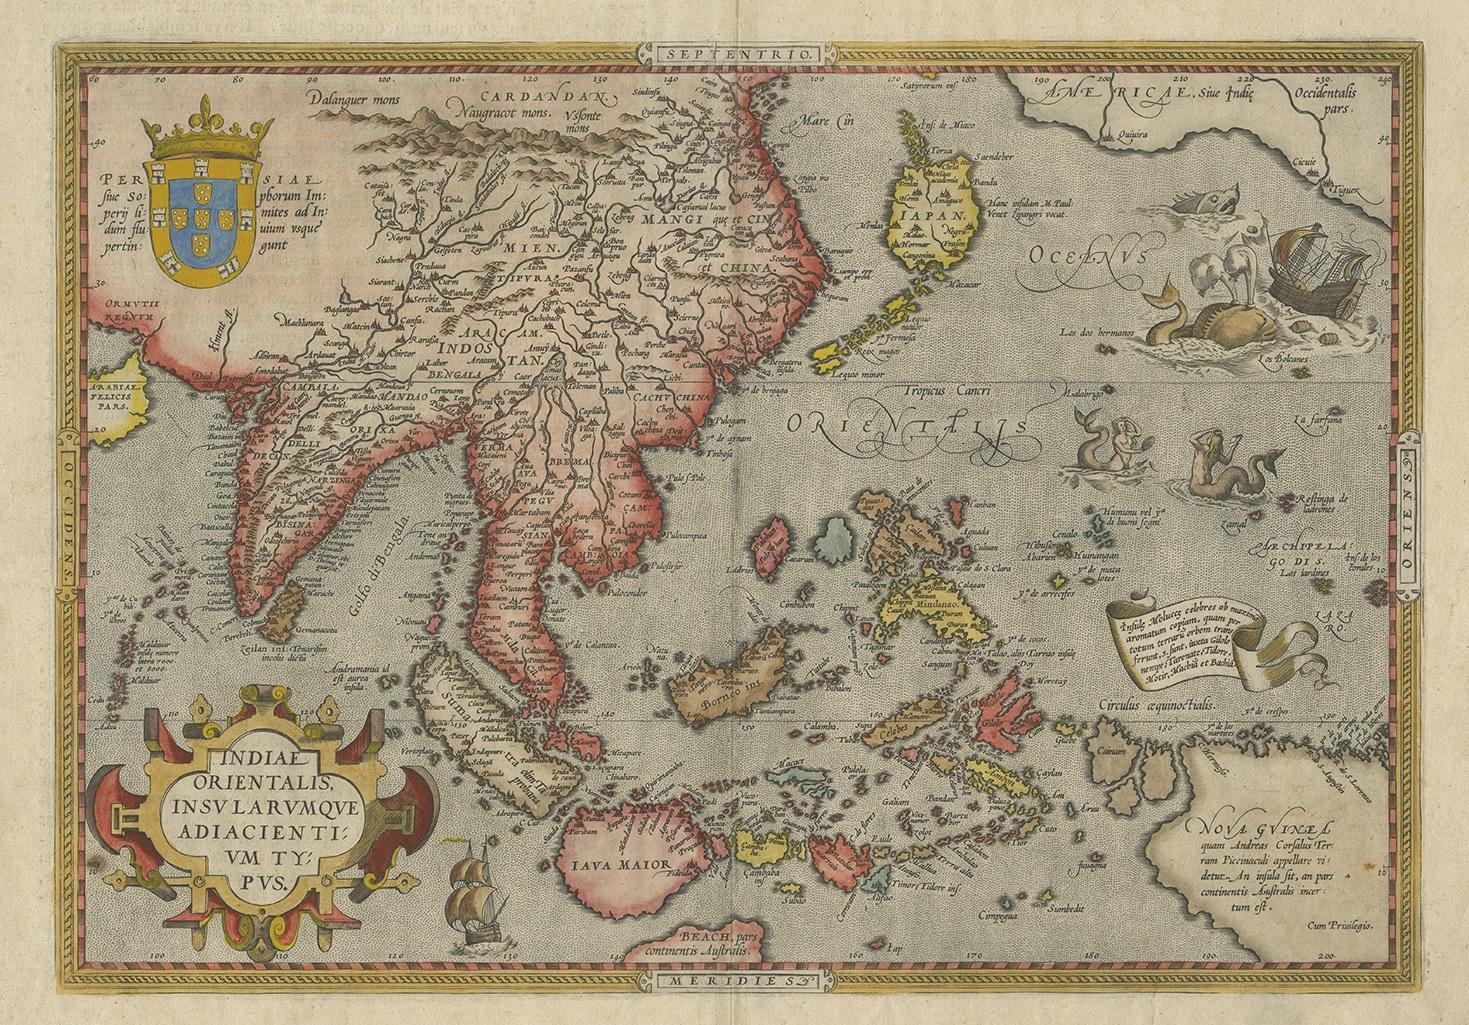 Antique map titled 'Indiae Orientalis Insularumque Adiacientium Typus'. Ortelius includes early European depictions of both Japan and China and is the first to name Formosa (Taiwan). The Philippines and East Indies or Spice Islands are shown based